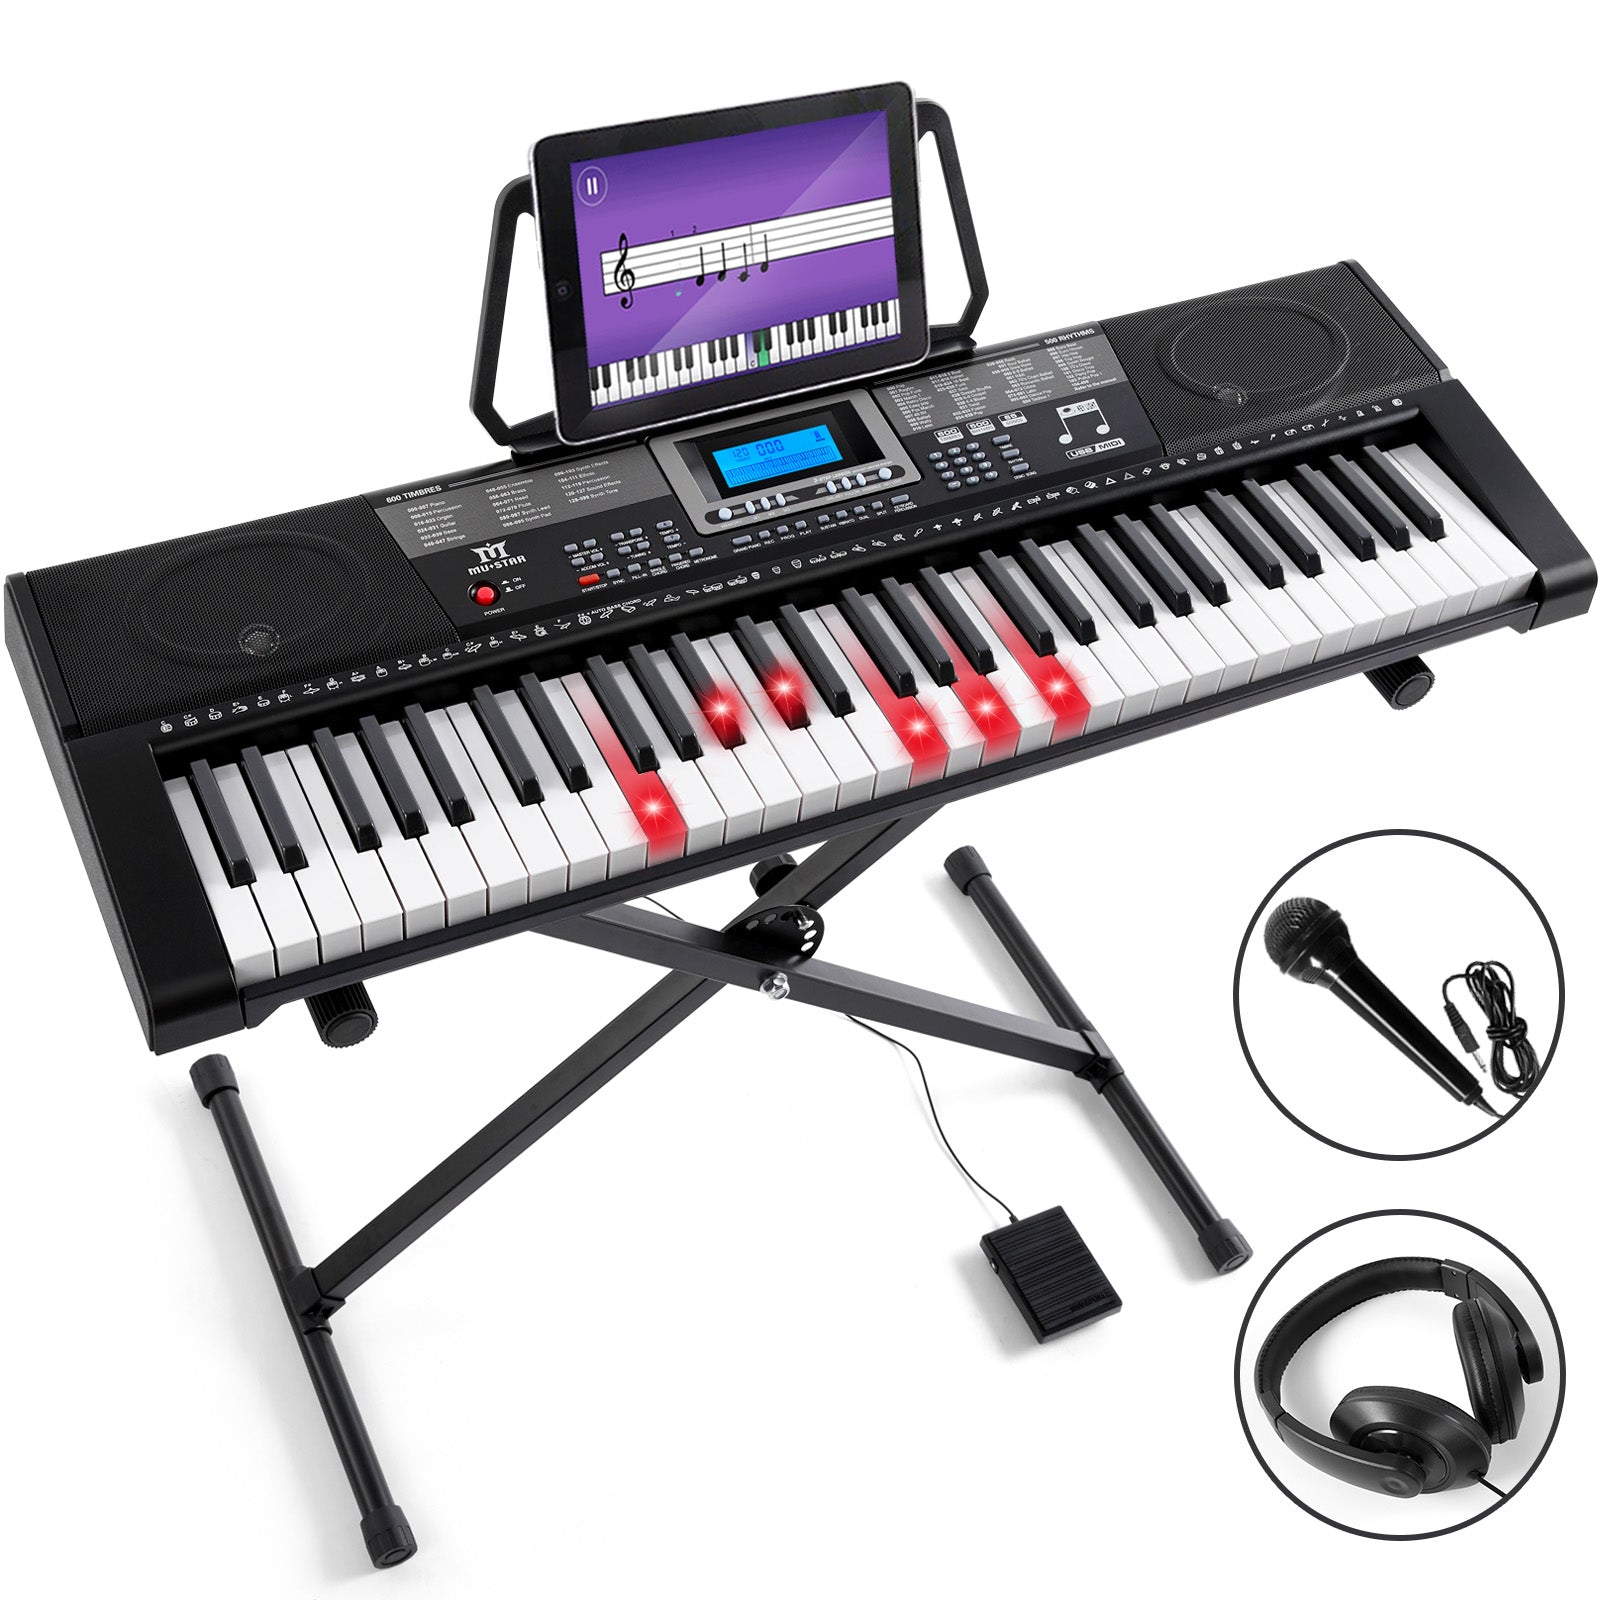 MUSTAR MEKS-500, 61 Key Piano Keyboard, Learning Electric Piano Keyboard with Lighted Up Keys for Beginners Black